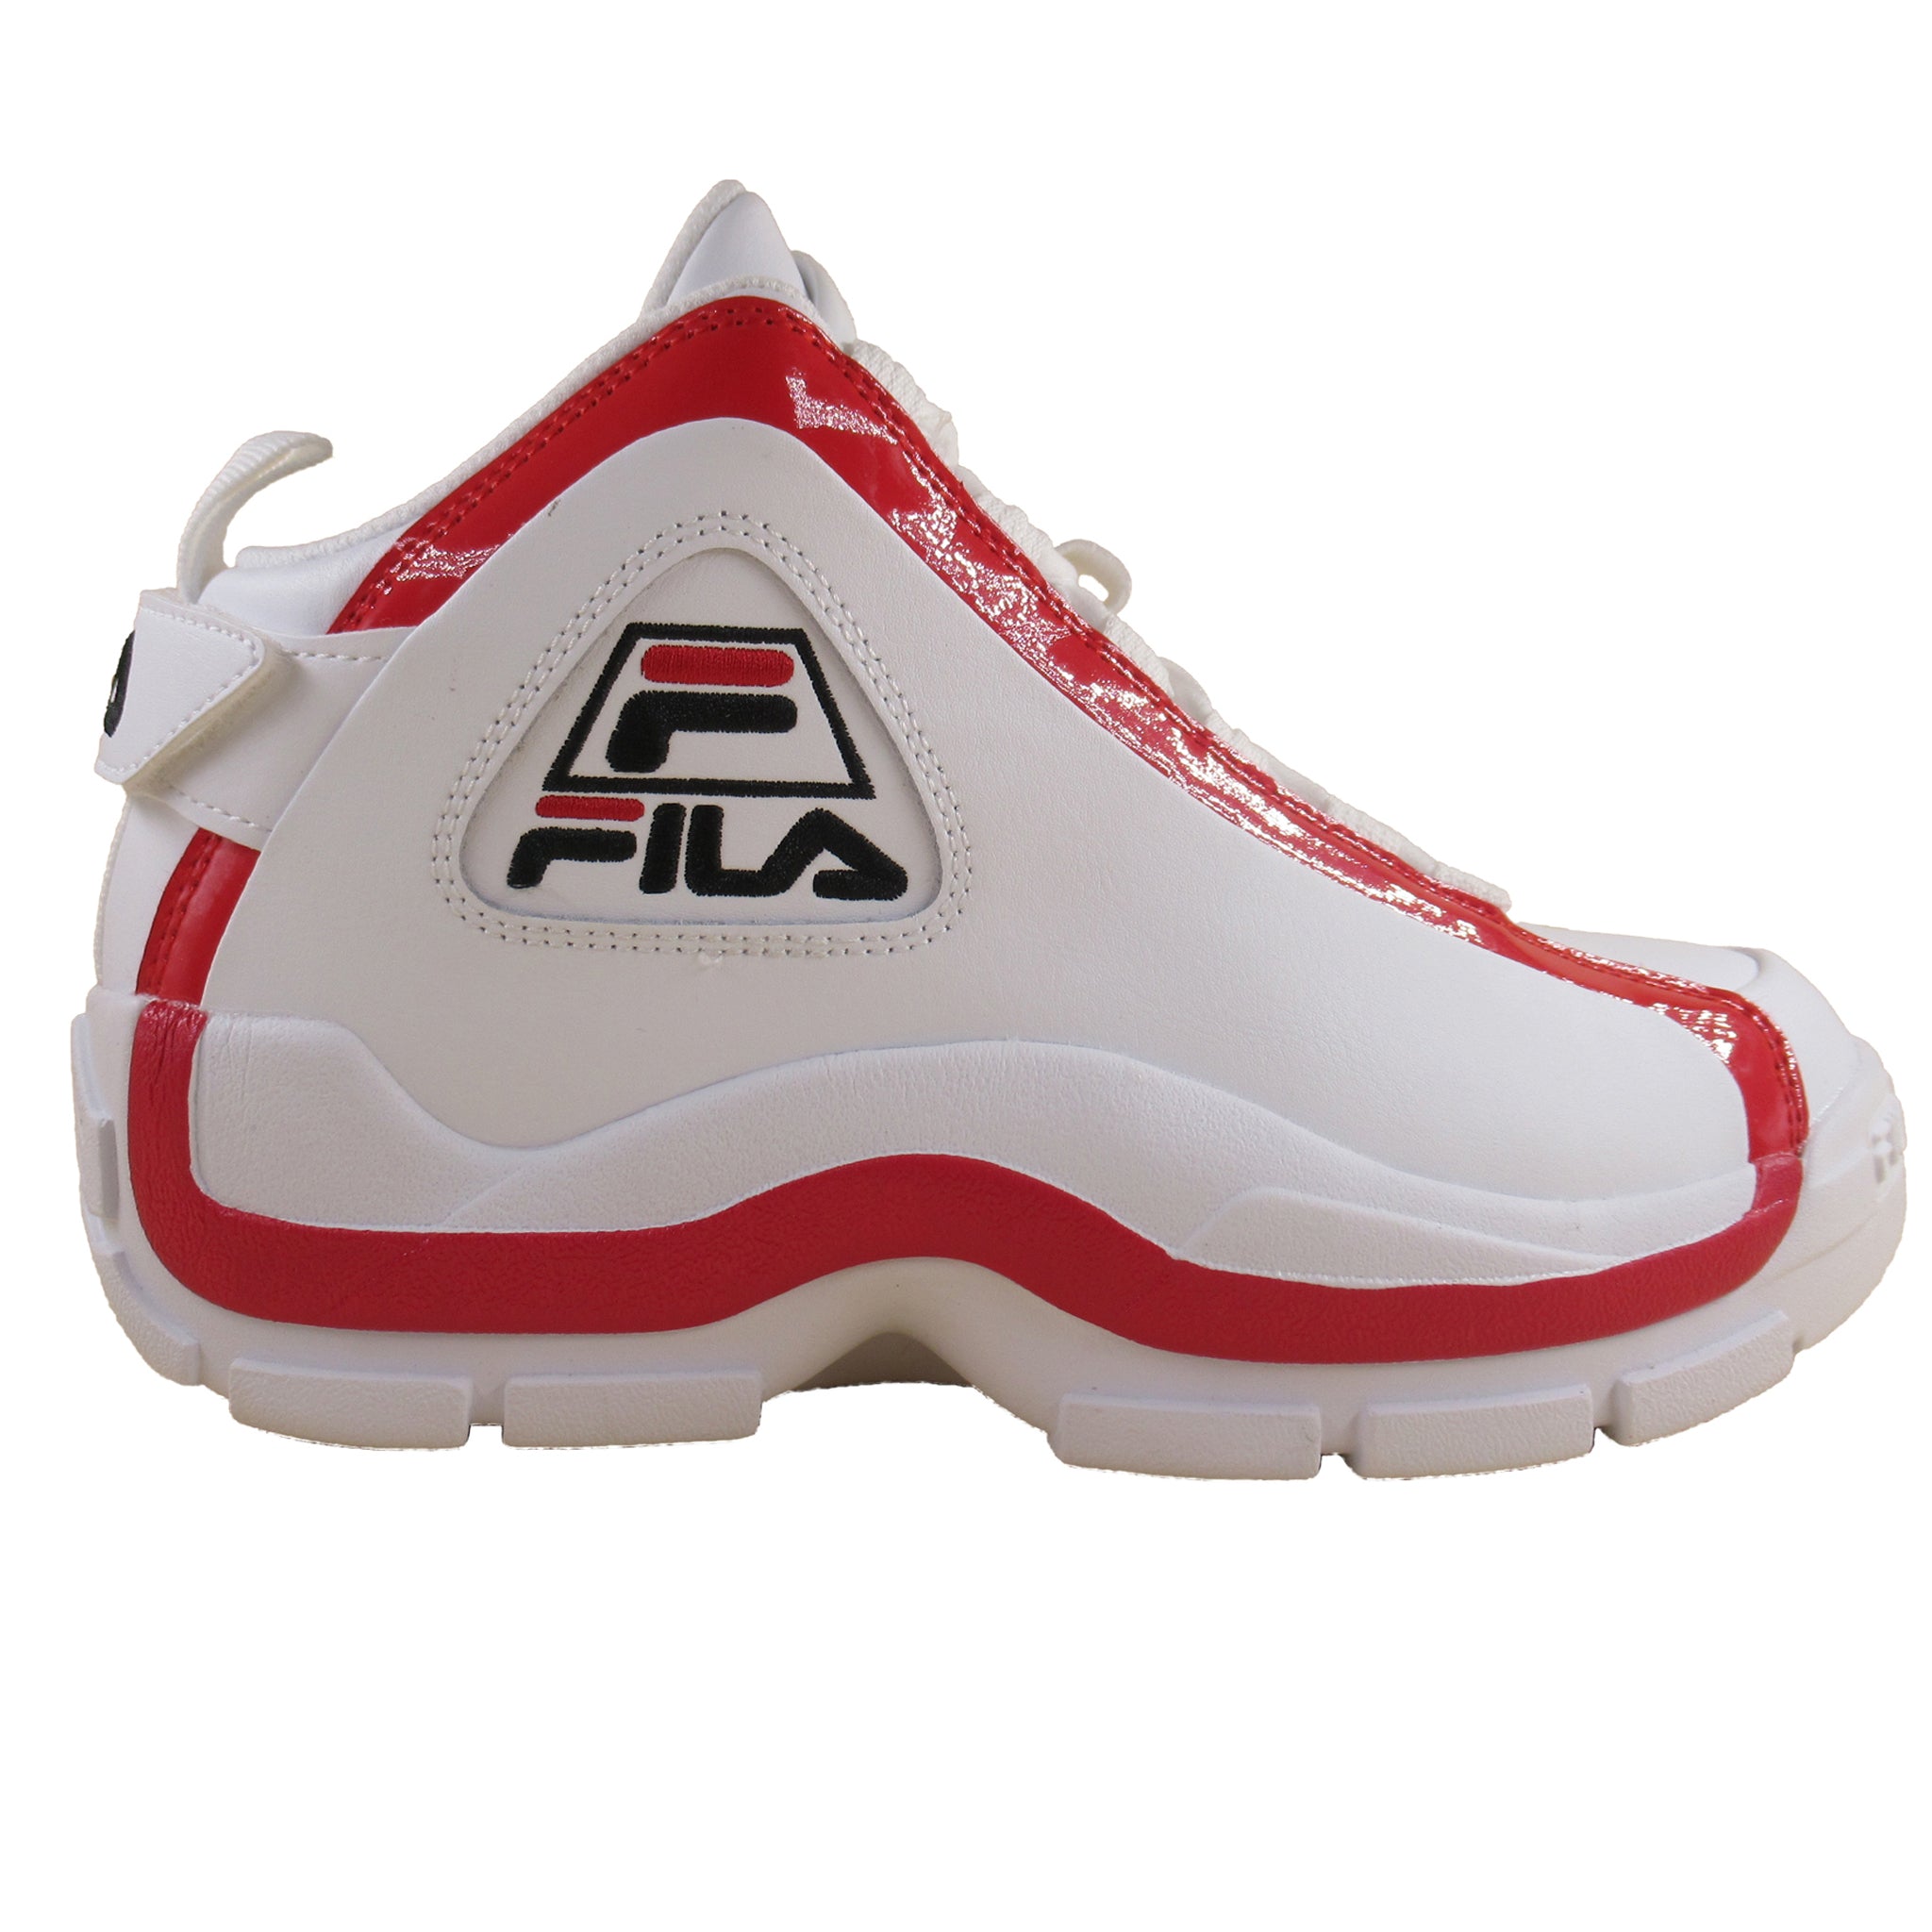 grant hill basketball shoes